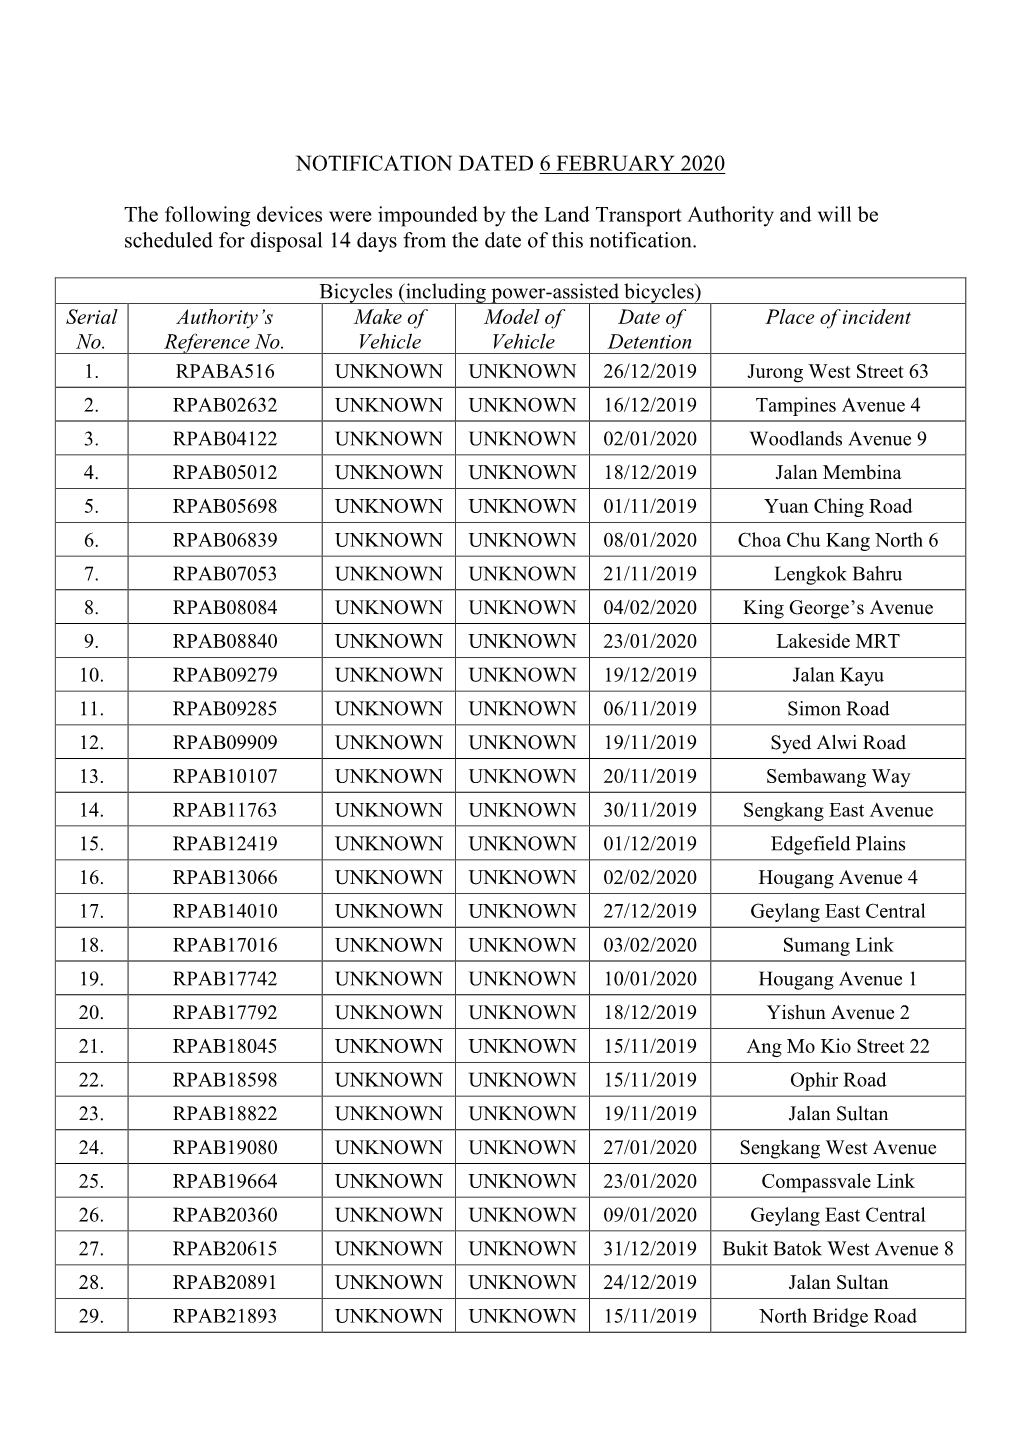 NOTIFICATION DATED 6 FEBRUARY 2020 the Following Devices Were Impounded by the Land Transport Authority and Will Be Scheduled Fo